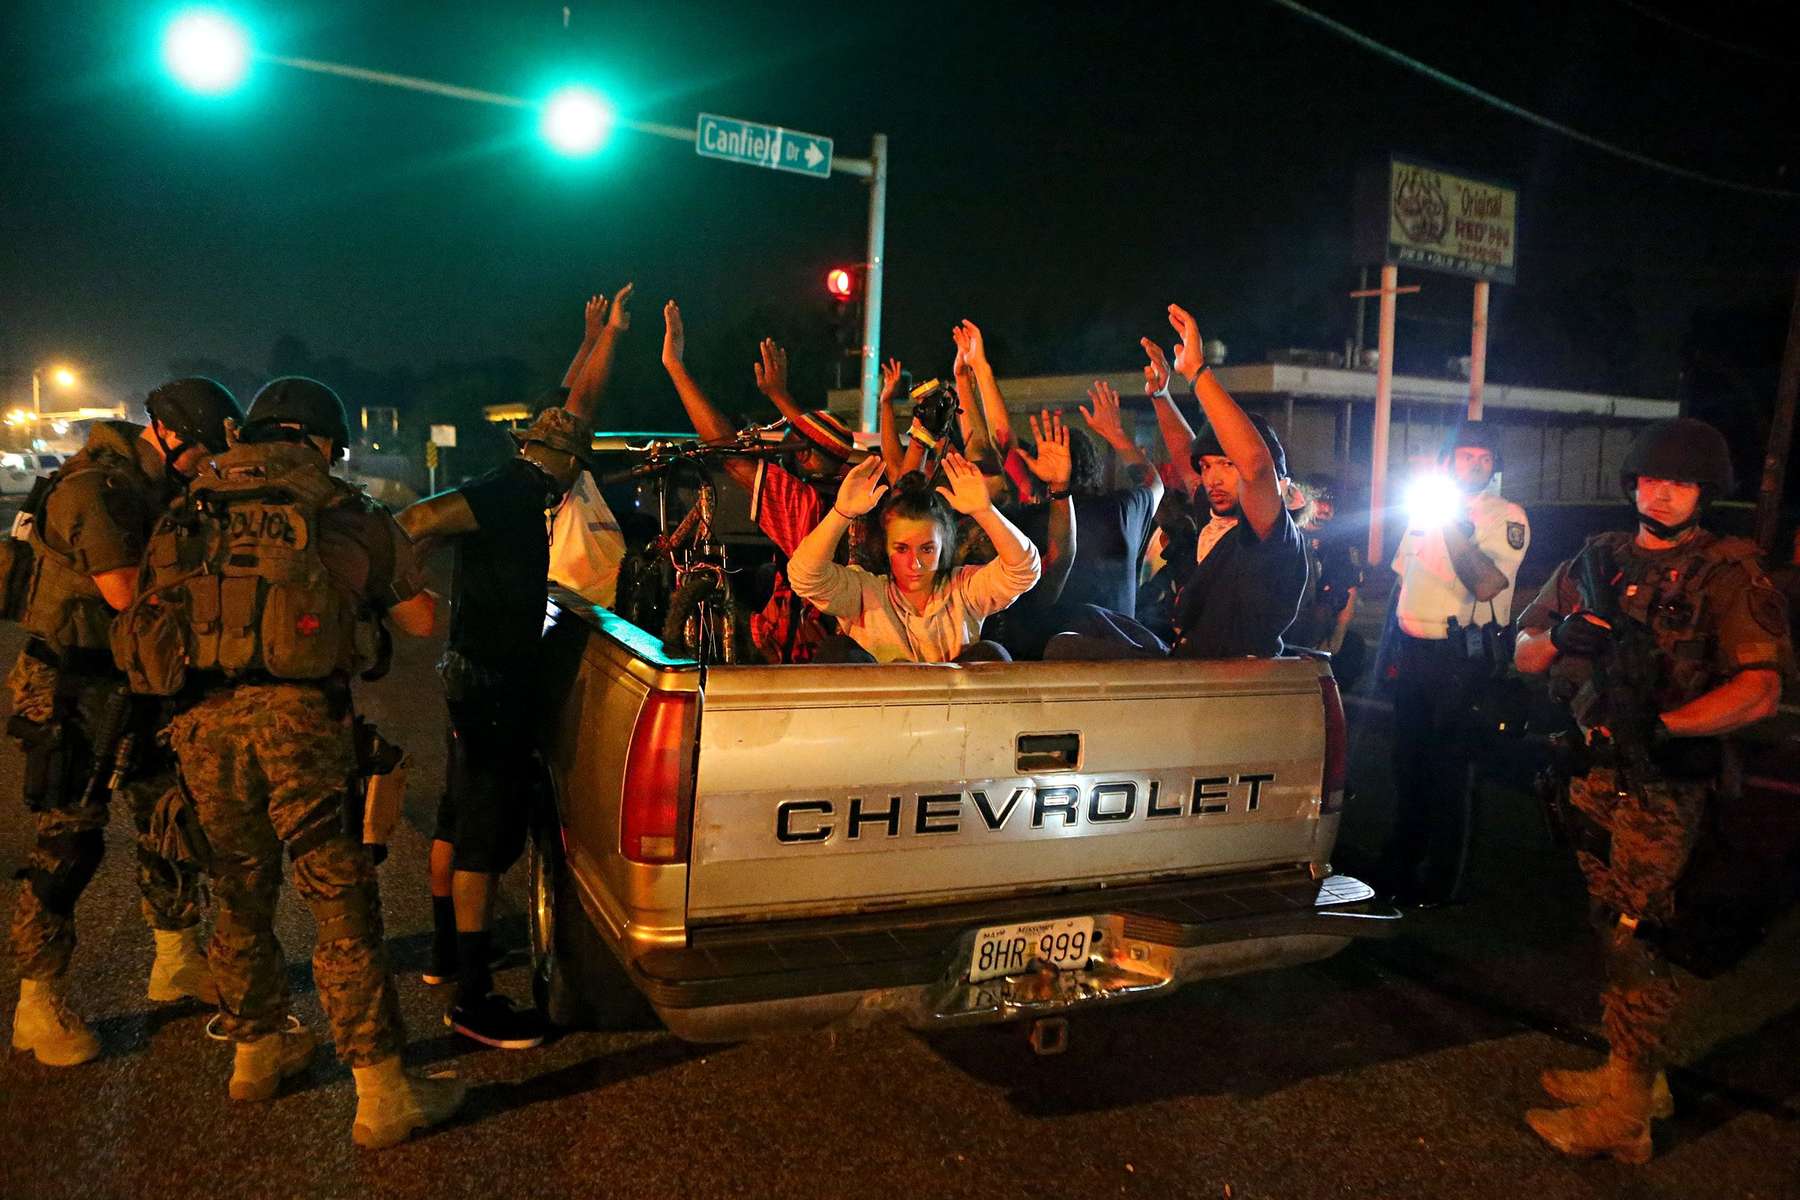 Members of the St. Louis County Police tactical team take a truck load of 12 people into custody after they stopped it driving along W. Florissant Road near Canfield Drive in Ferguson, Mo. on Tuesday, Aug. 19, 2014.  The police found two loaded guns on the people in the truck and removed a large Molotov cocktail from the truck.